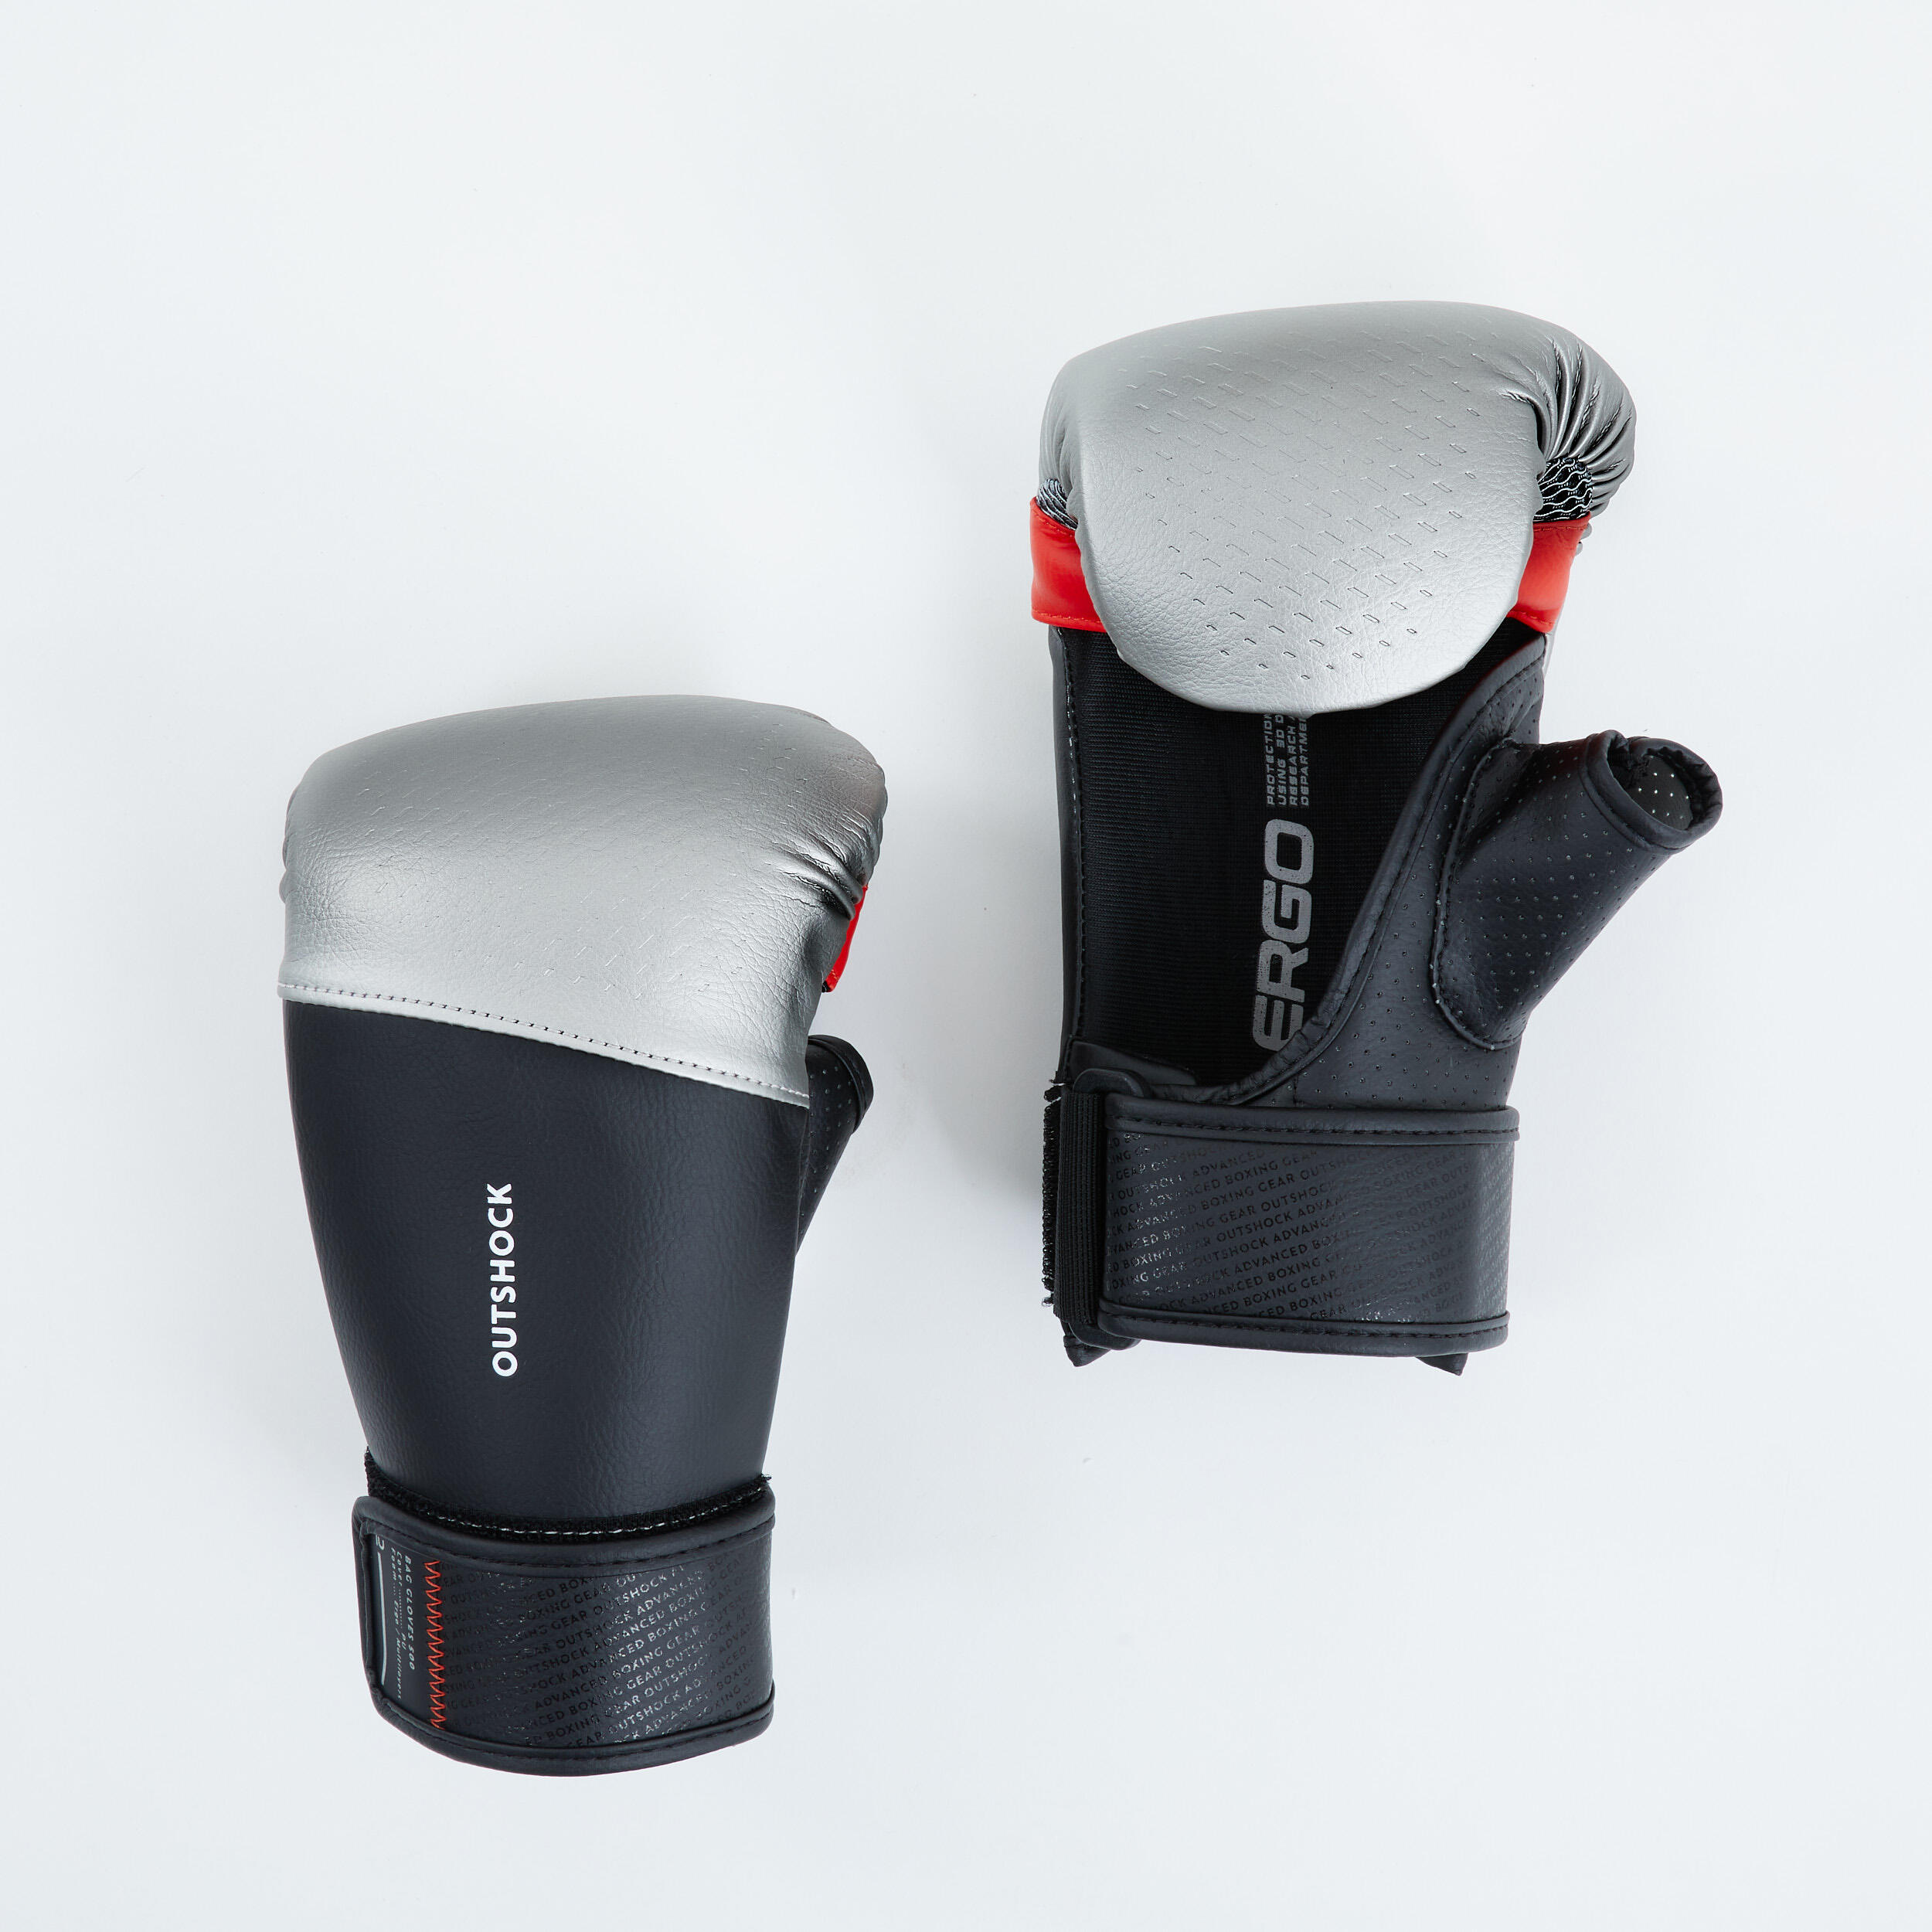 15 best boxing gloves to shop 2022